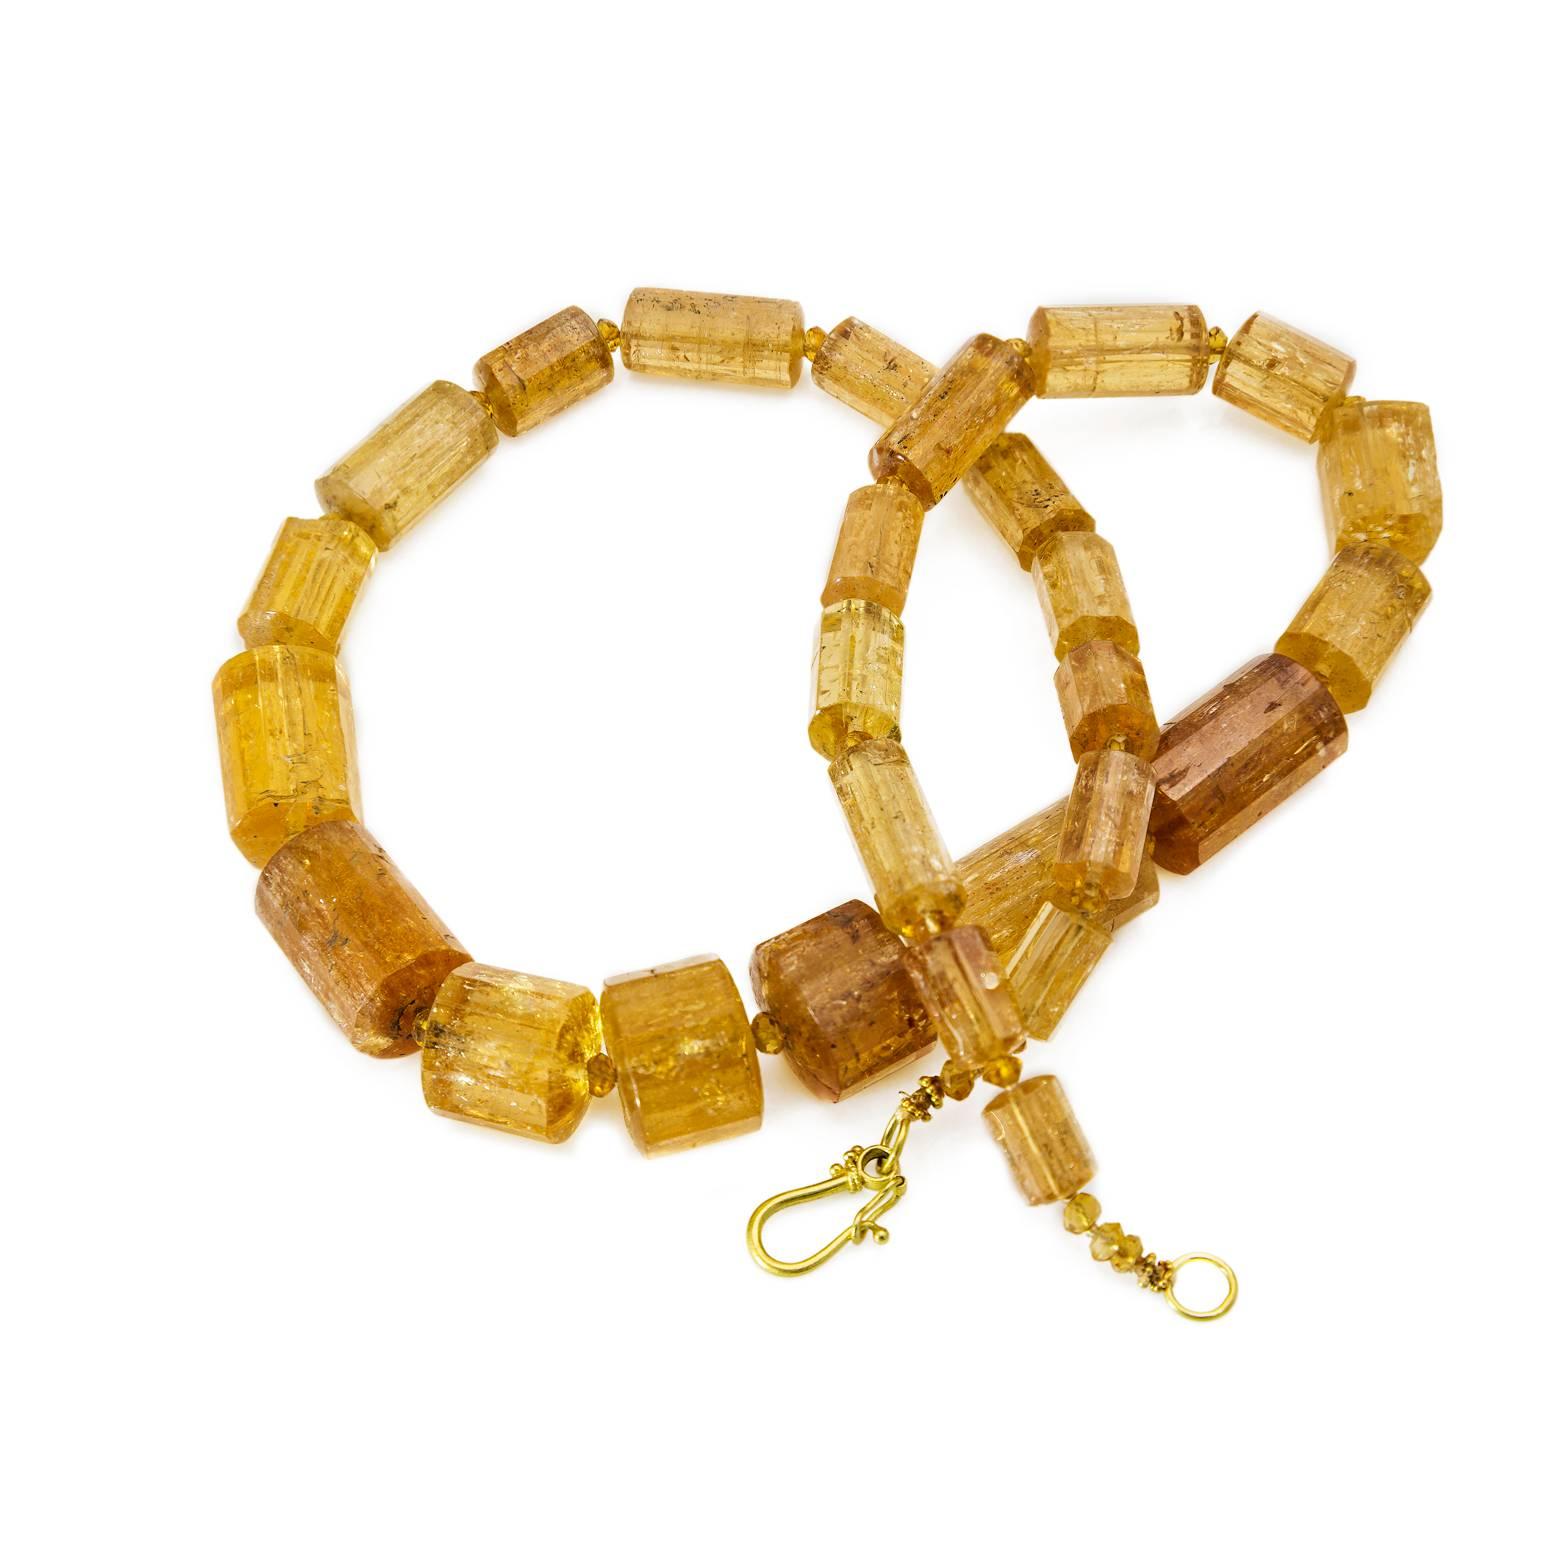 Modern Topaz Channel Beads Necklace